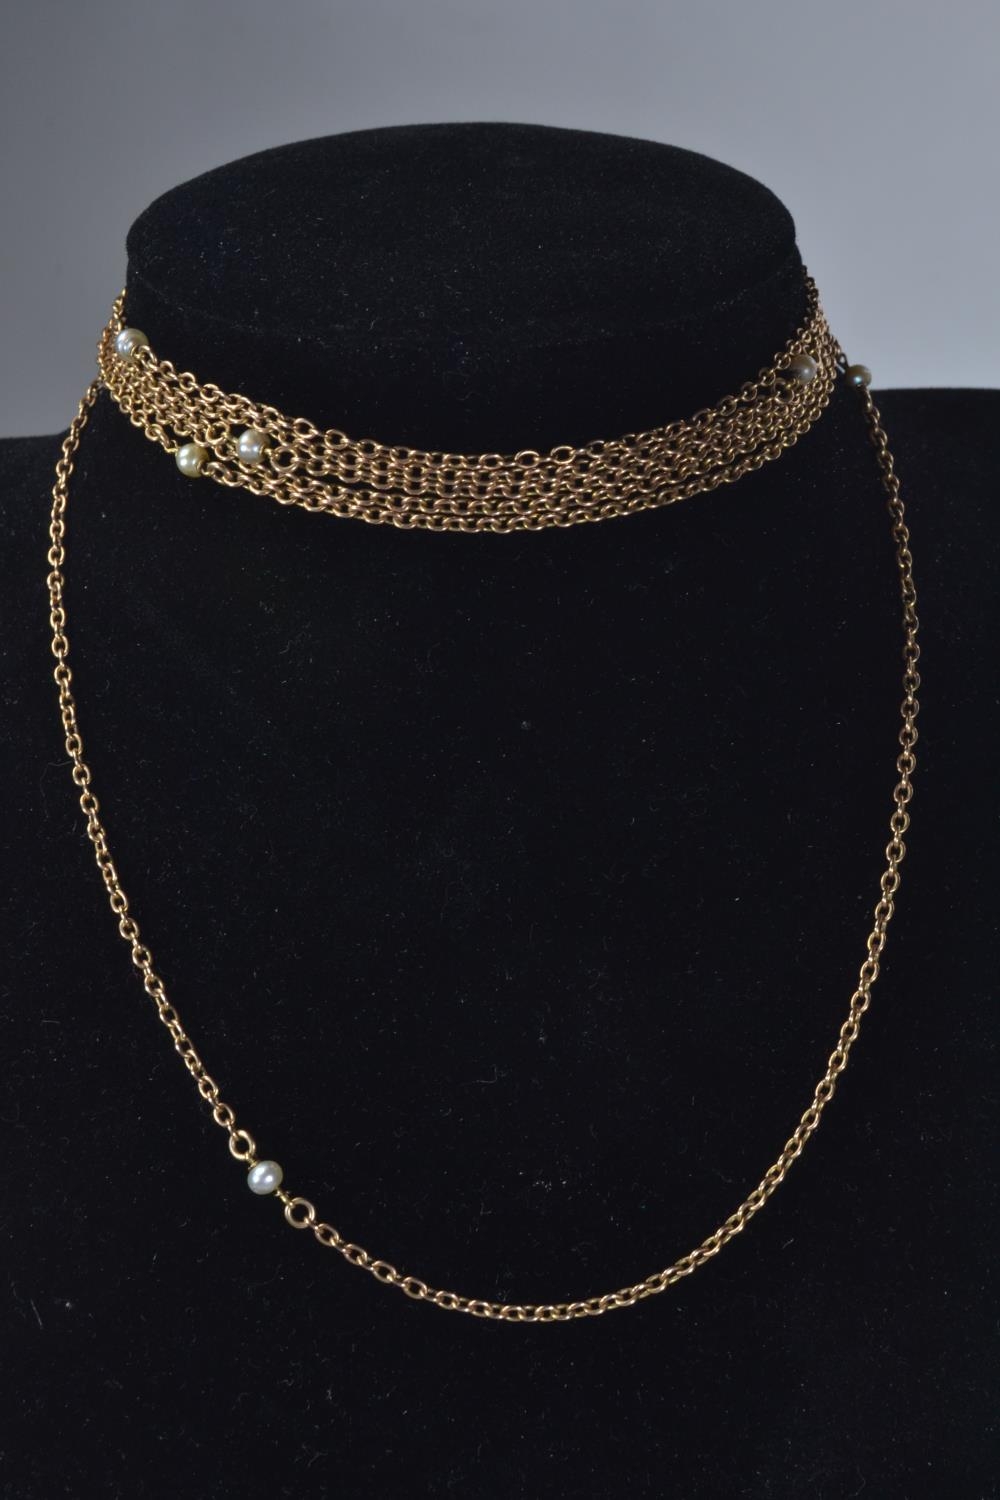 15ct rose gold & seed pearl long chain, circumference 1560mm, gross weight 16.69 grams  - Image 3 of 4